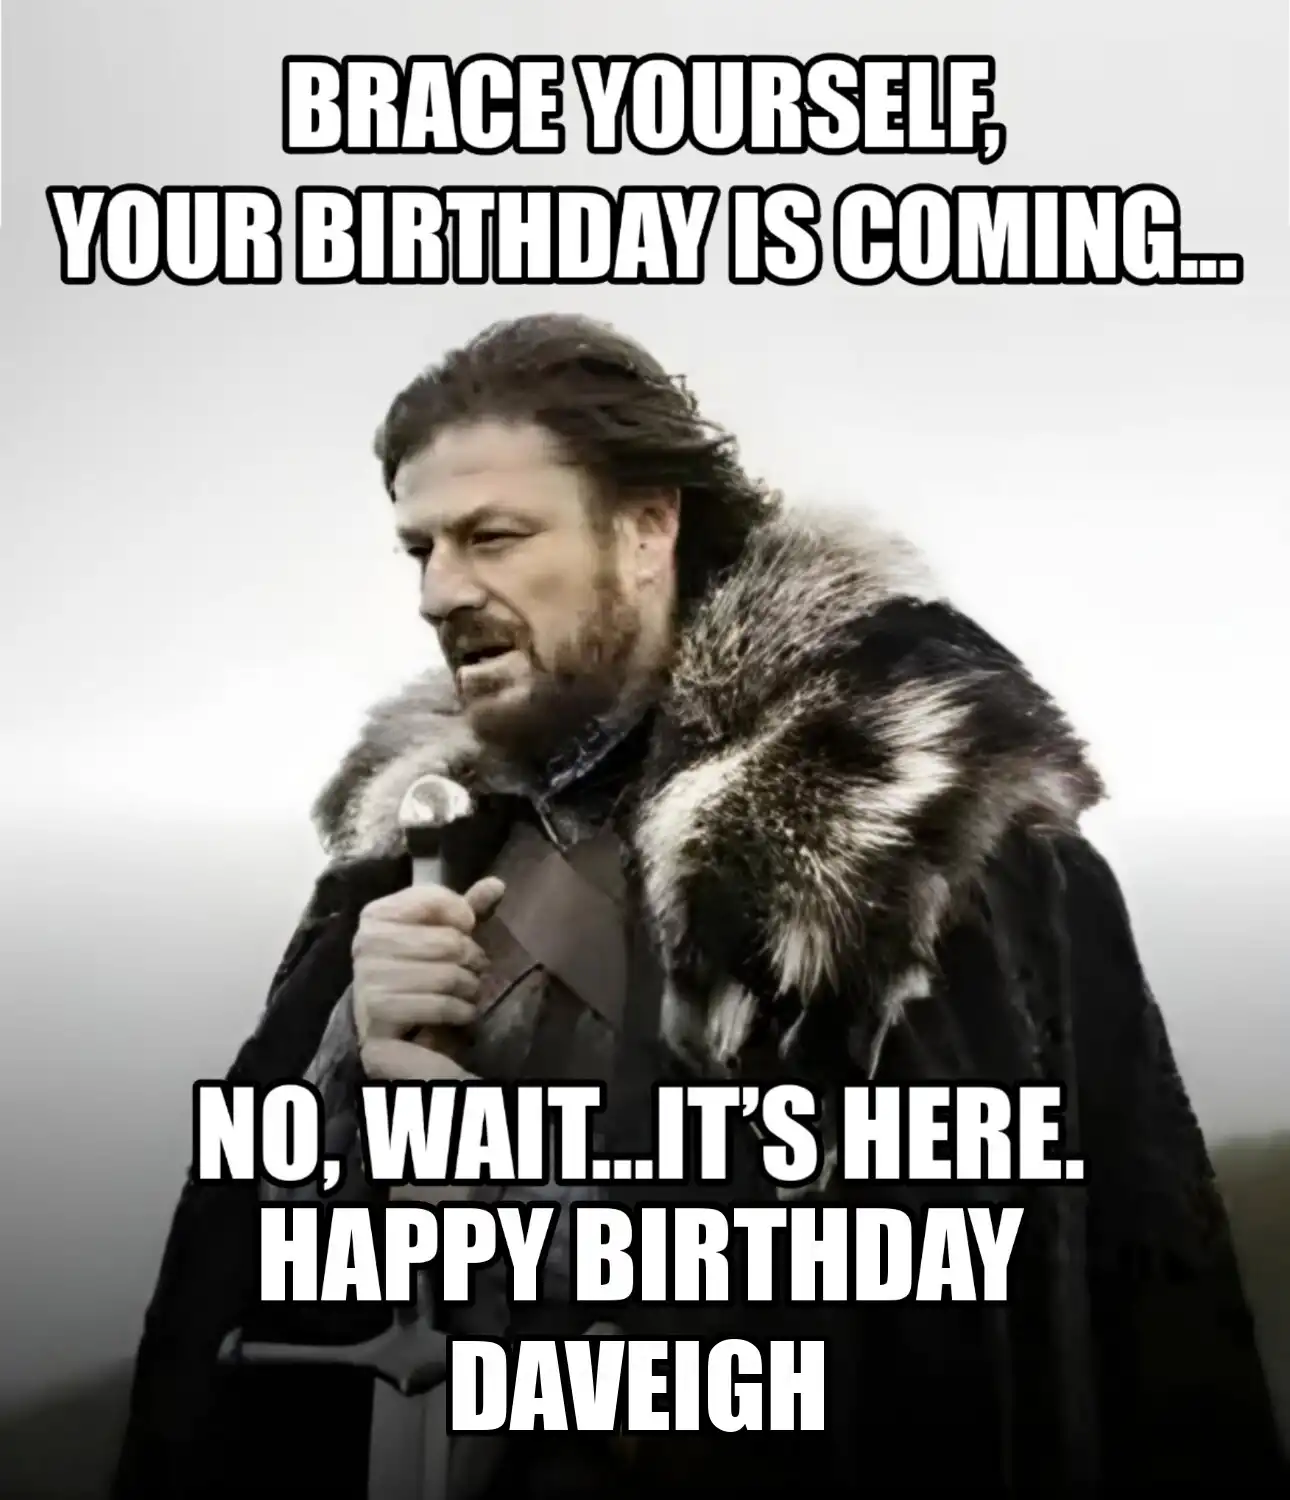 Happy Birthday Daveigh Brace Yourself Your Birthday Is Coming Meme